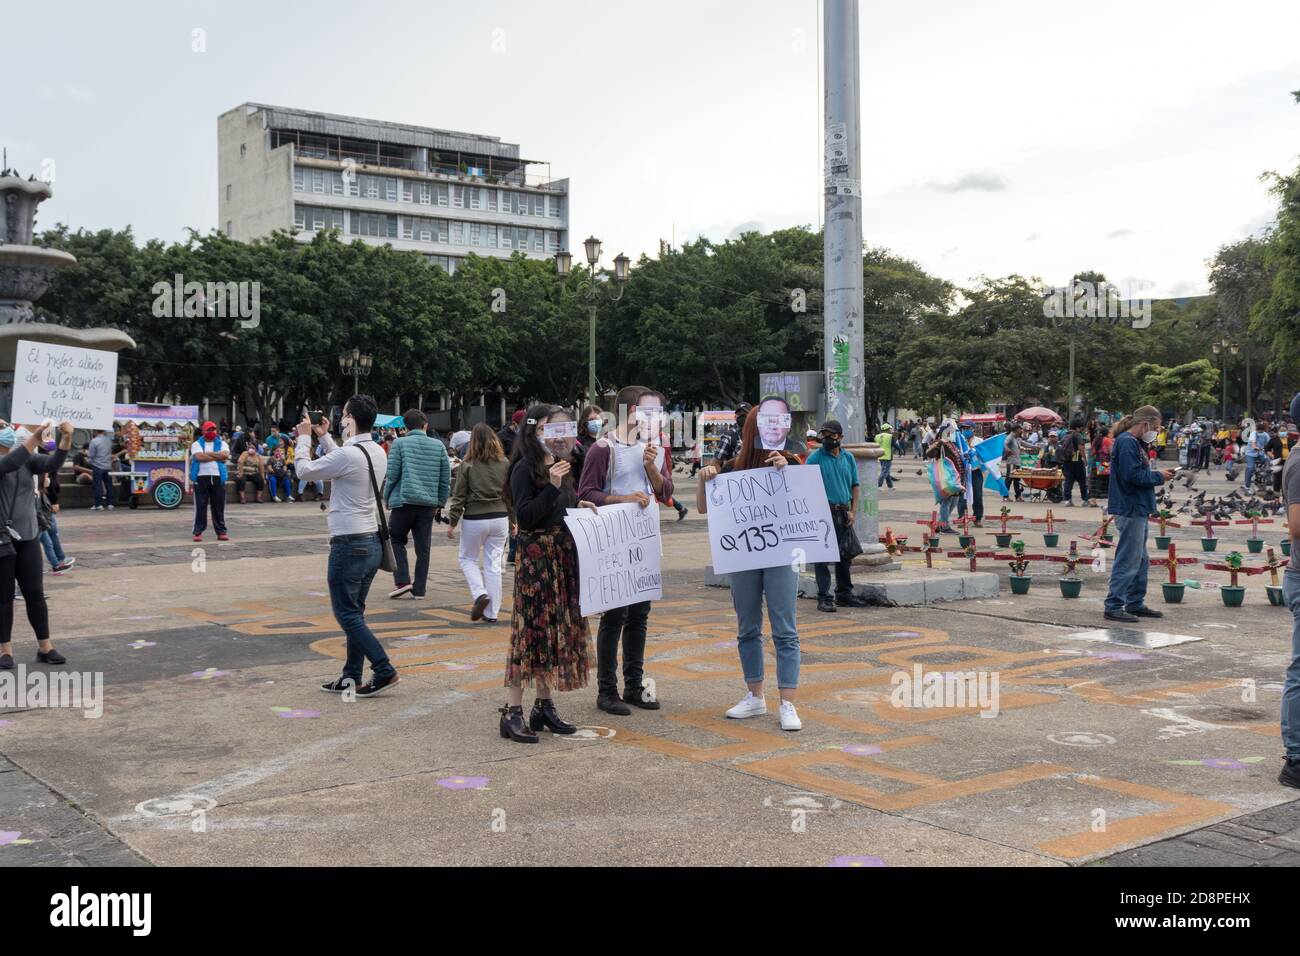 Protest against government corruption in central plaza downtown Guatemala city Stock Photo